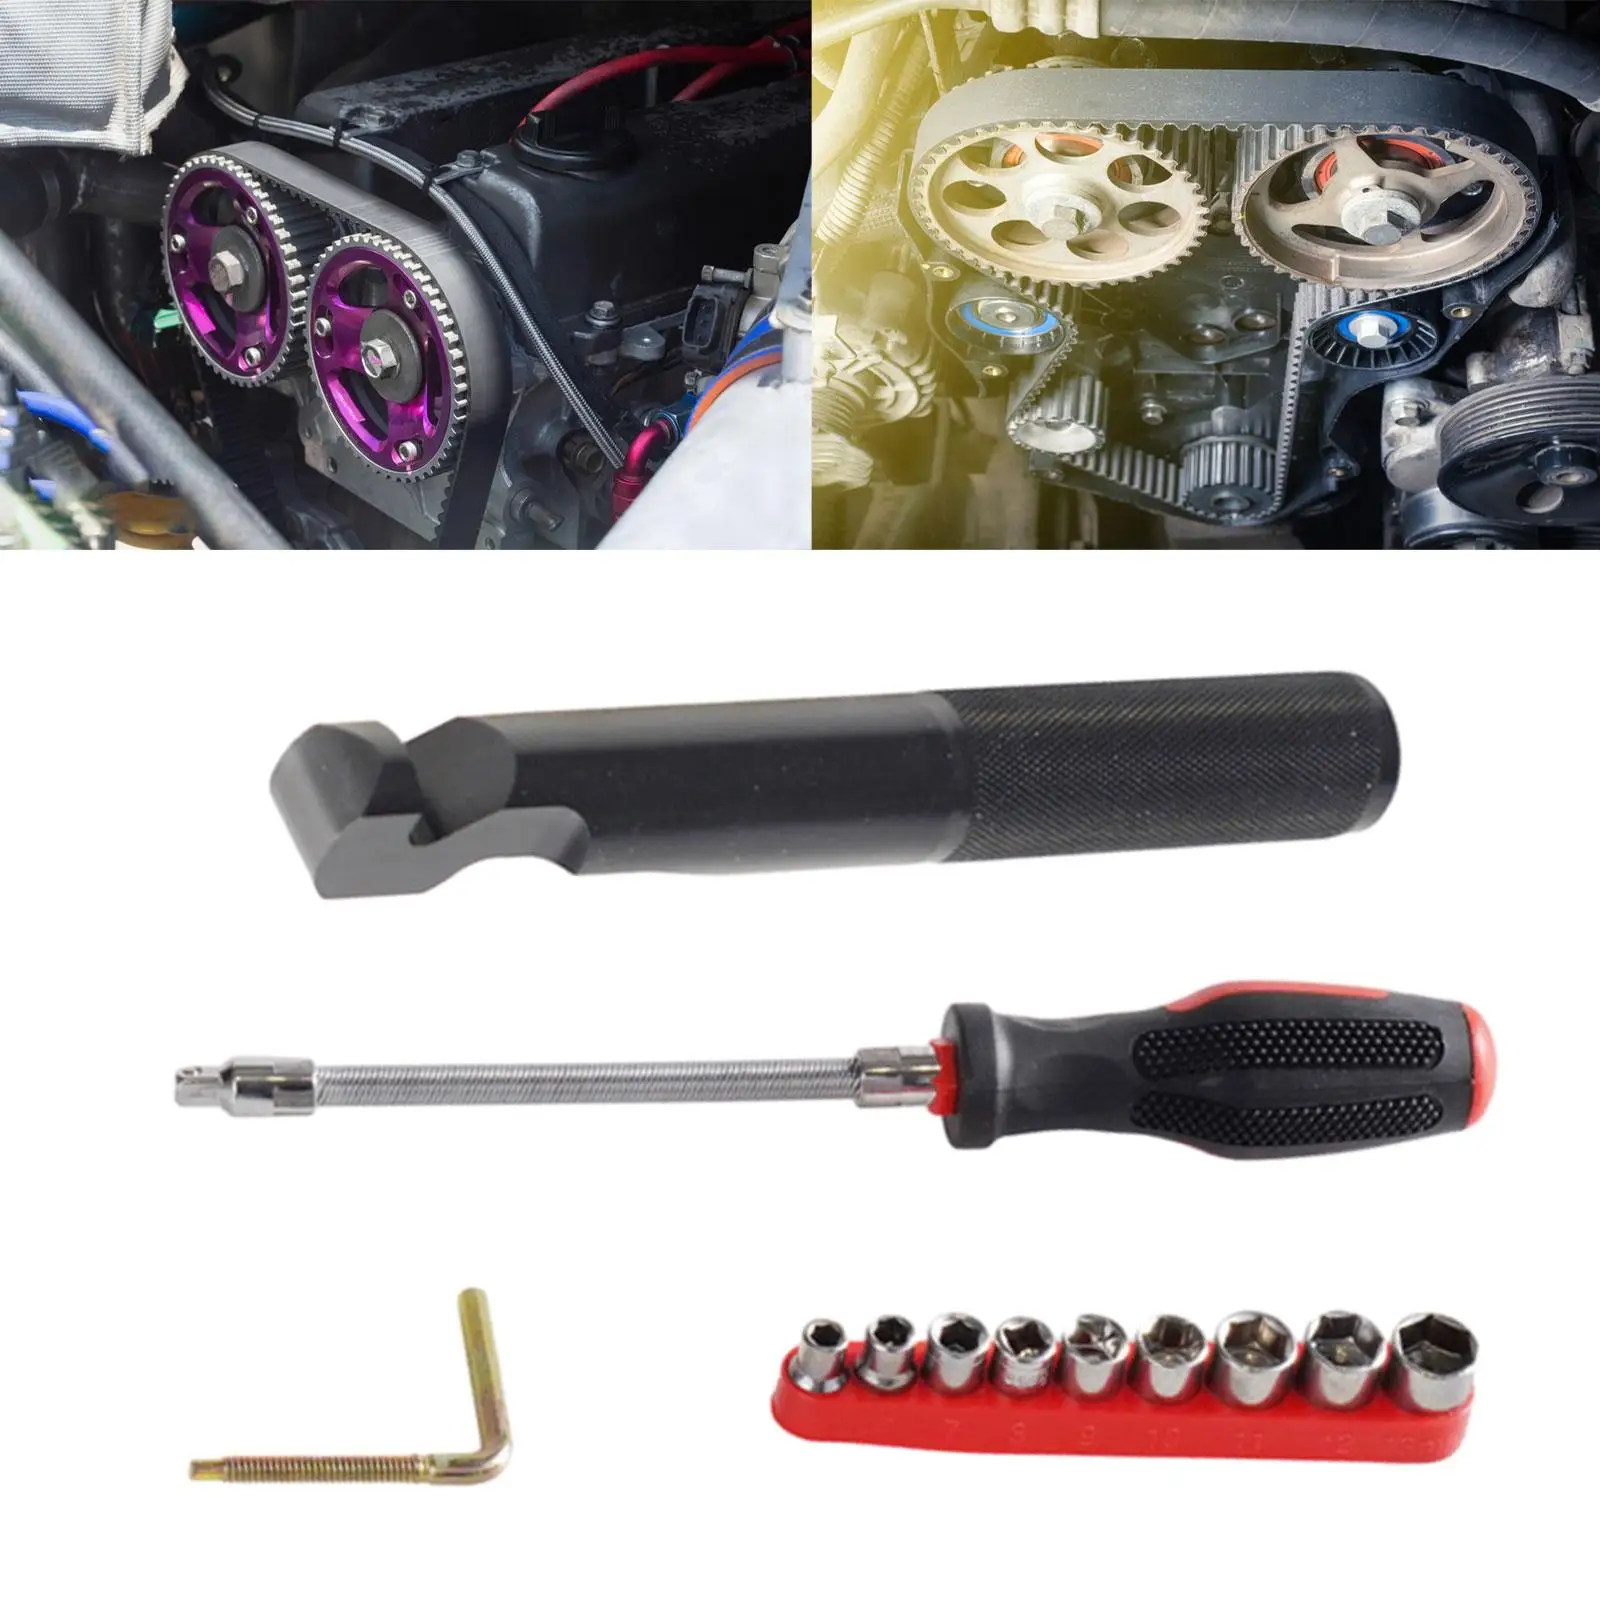 

Belt Changing Tool Clutch Removal Tool Portable Wear Resistant Sturdy Belt Replacement Tool for RZR S 900 XP Accessories